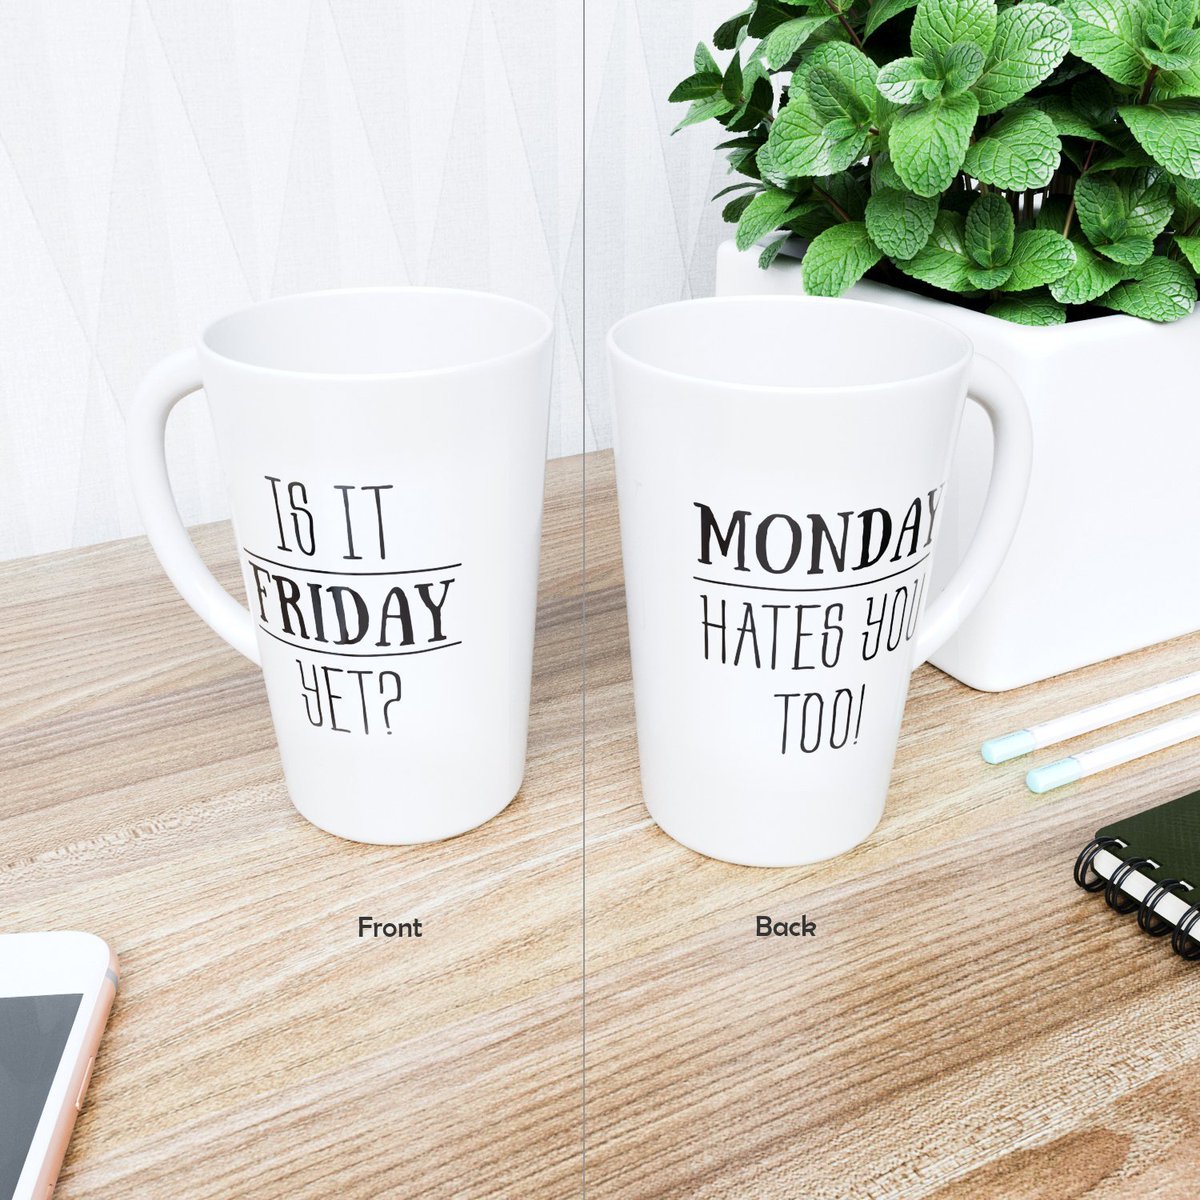 All you need on Monday is a good coffee and this awesome mug bit.ly/massive-coffee… Greet the next Monday with smile :) #Comfification #CoffeeTribe #CoffeeMug #CoffeeCup #TeaCup #TeaMug #CoffeeLovers #SpringSale #AwesomeMugs #UniqueMugs #CeramicCups #PrintedCups #FunnyMugs #Mugs